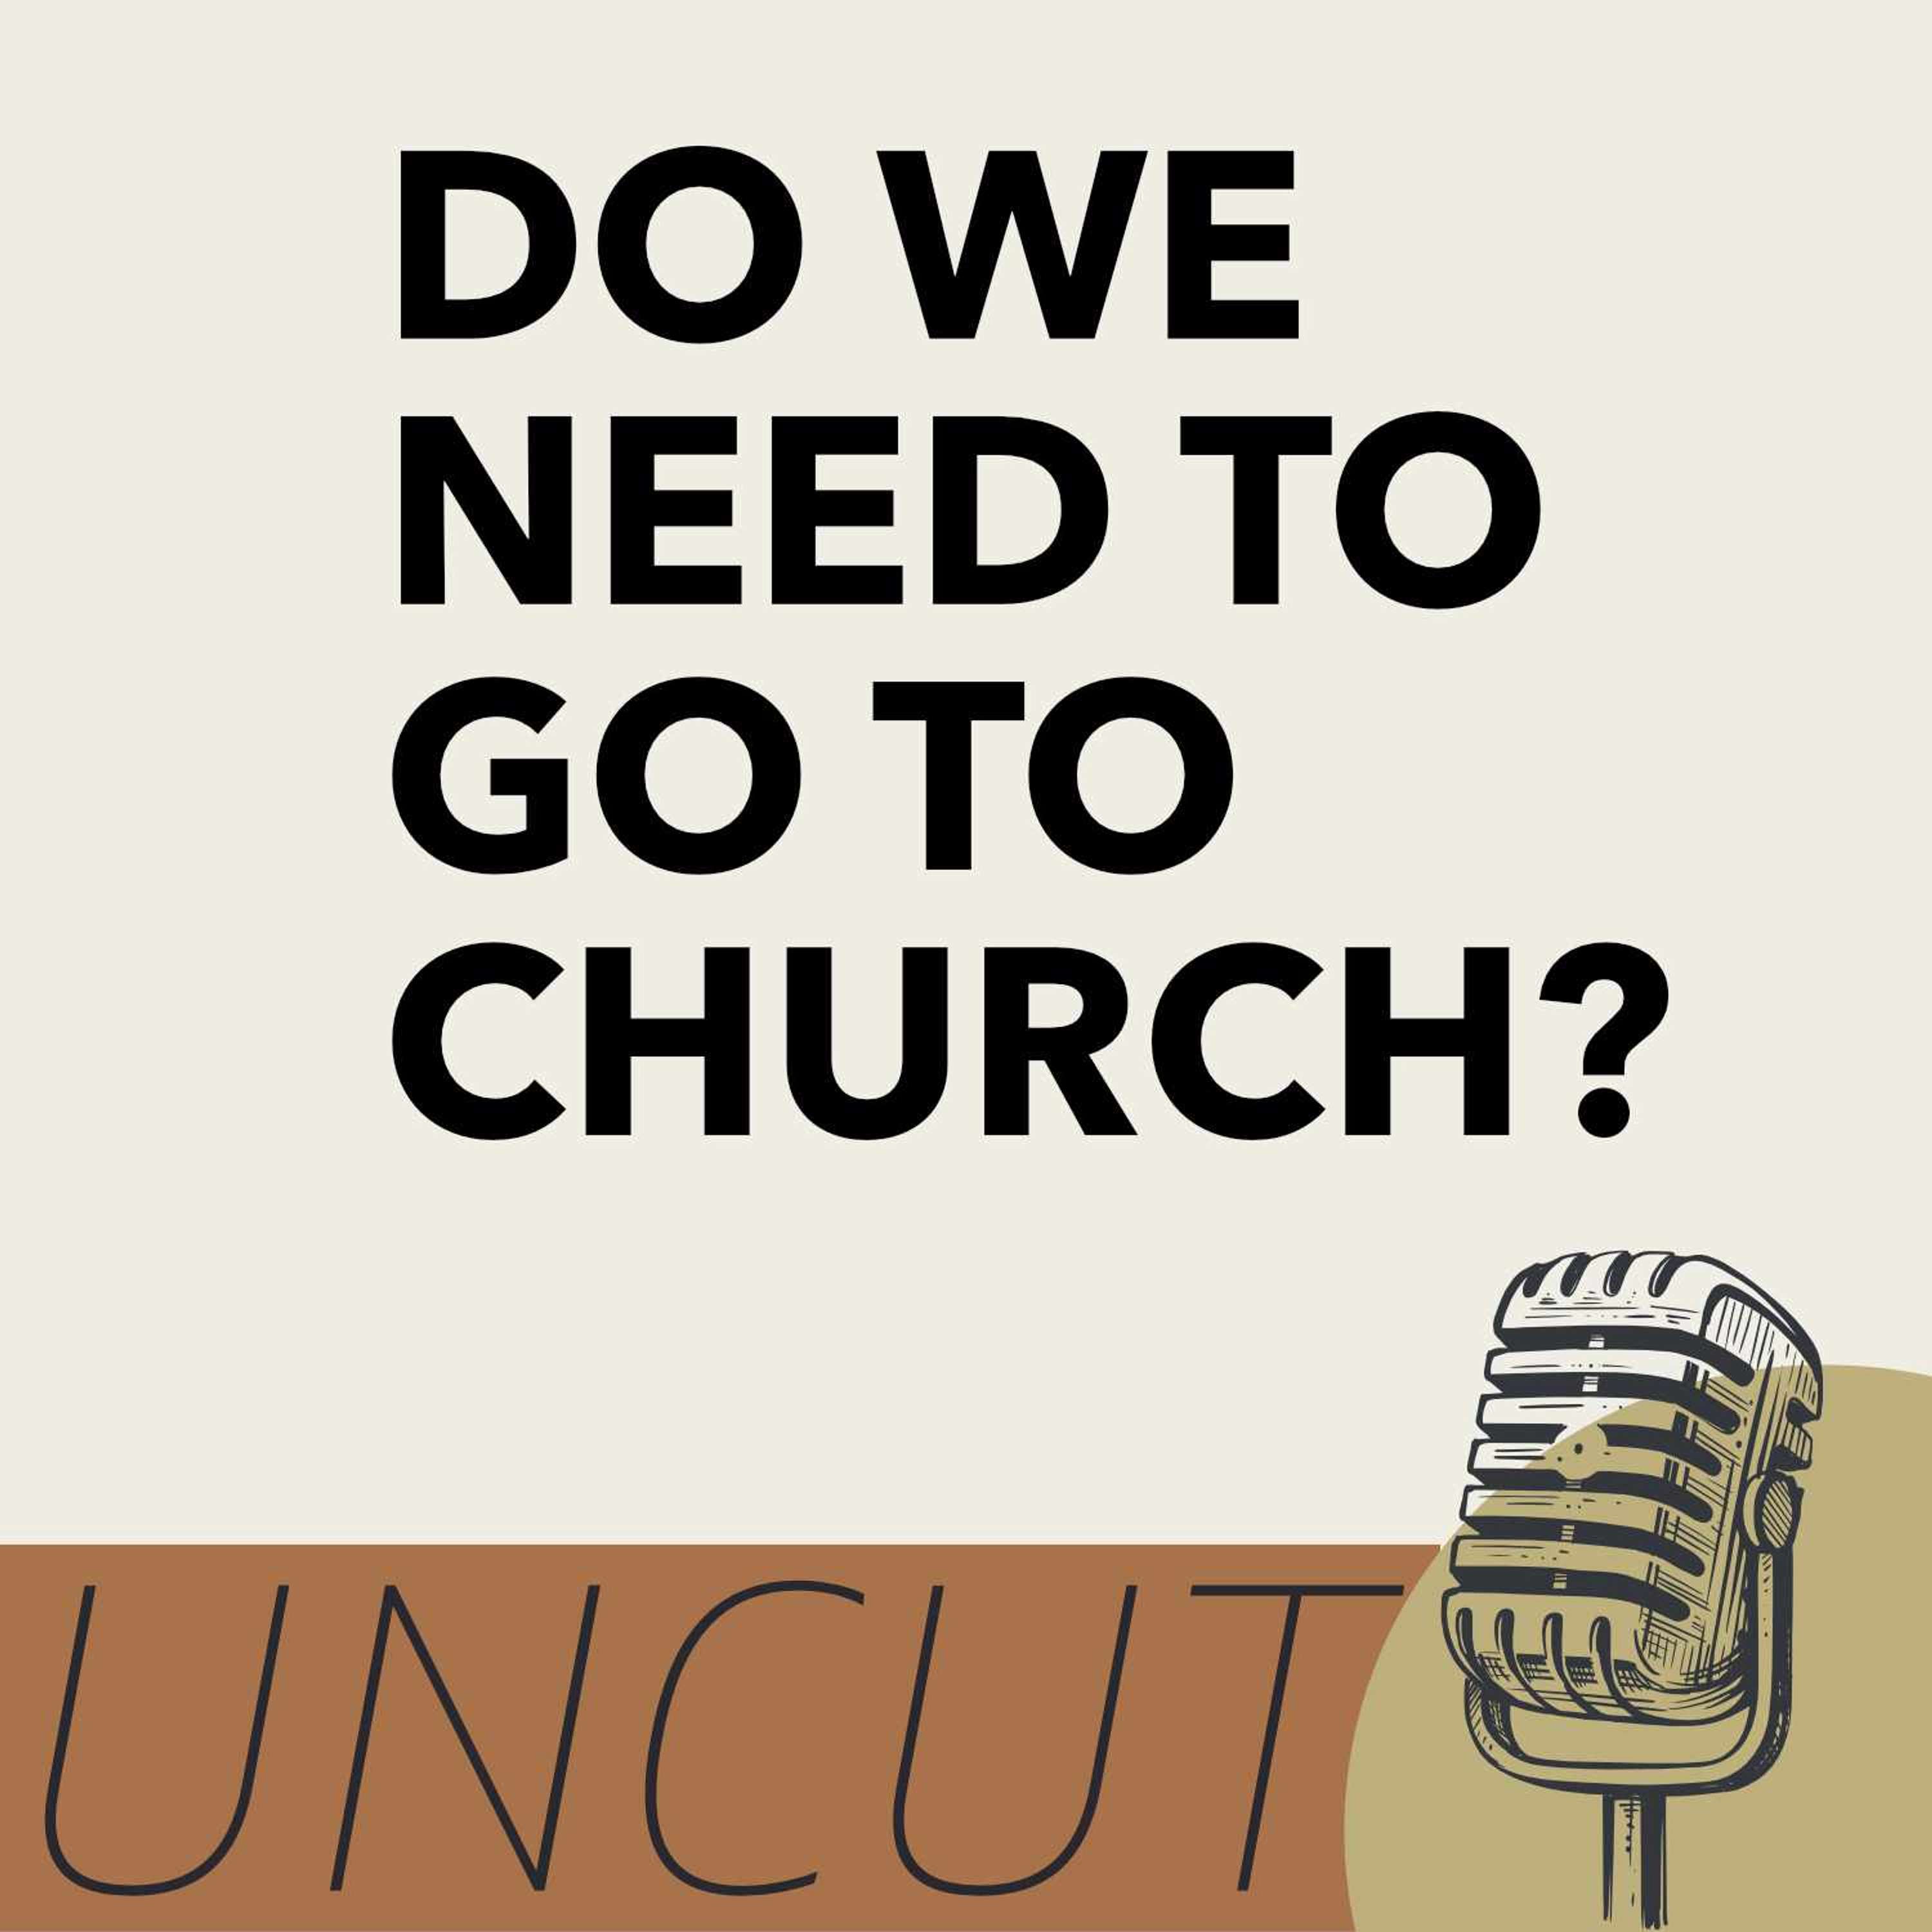 Loving Jesus but Hating the Church: Is the Church Important or Necessary?